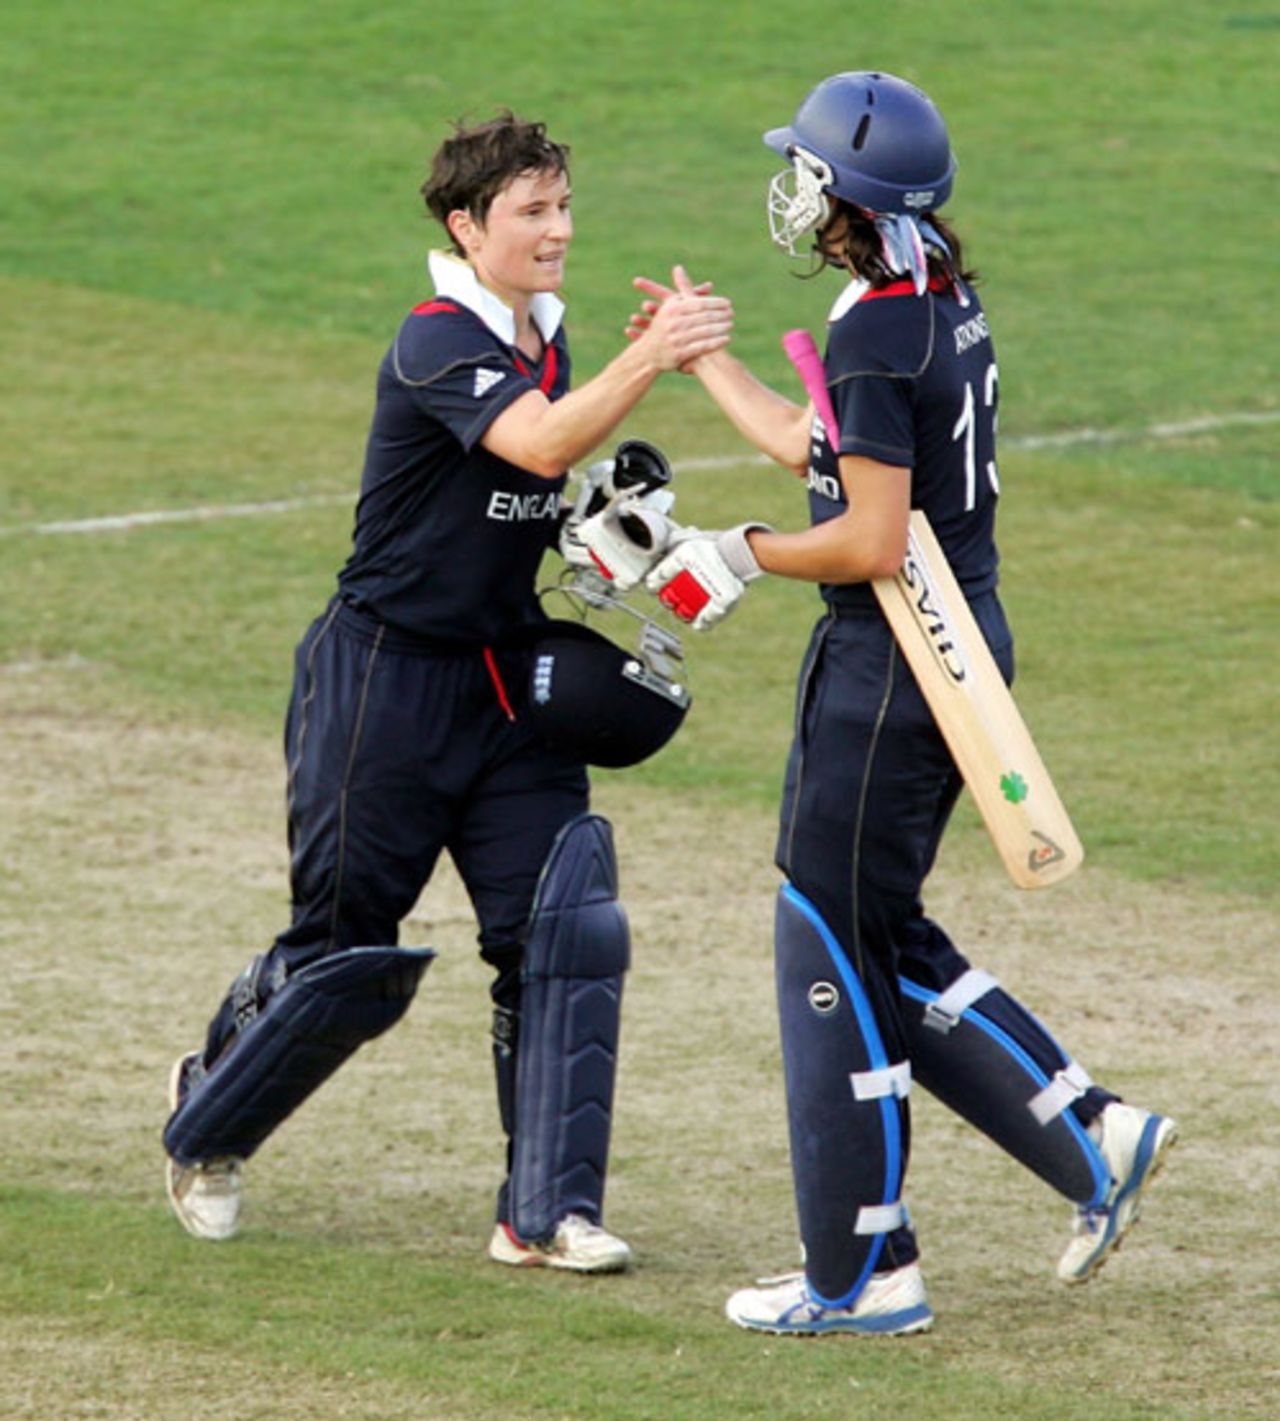 Claire Taylor and Caroline Atkins congratulate each other after securing the win, England v India, Group B, women's World Cup, Sydney, March 10, 2009
